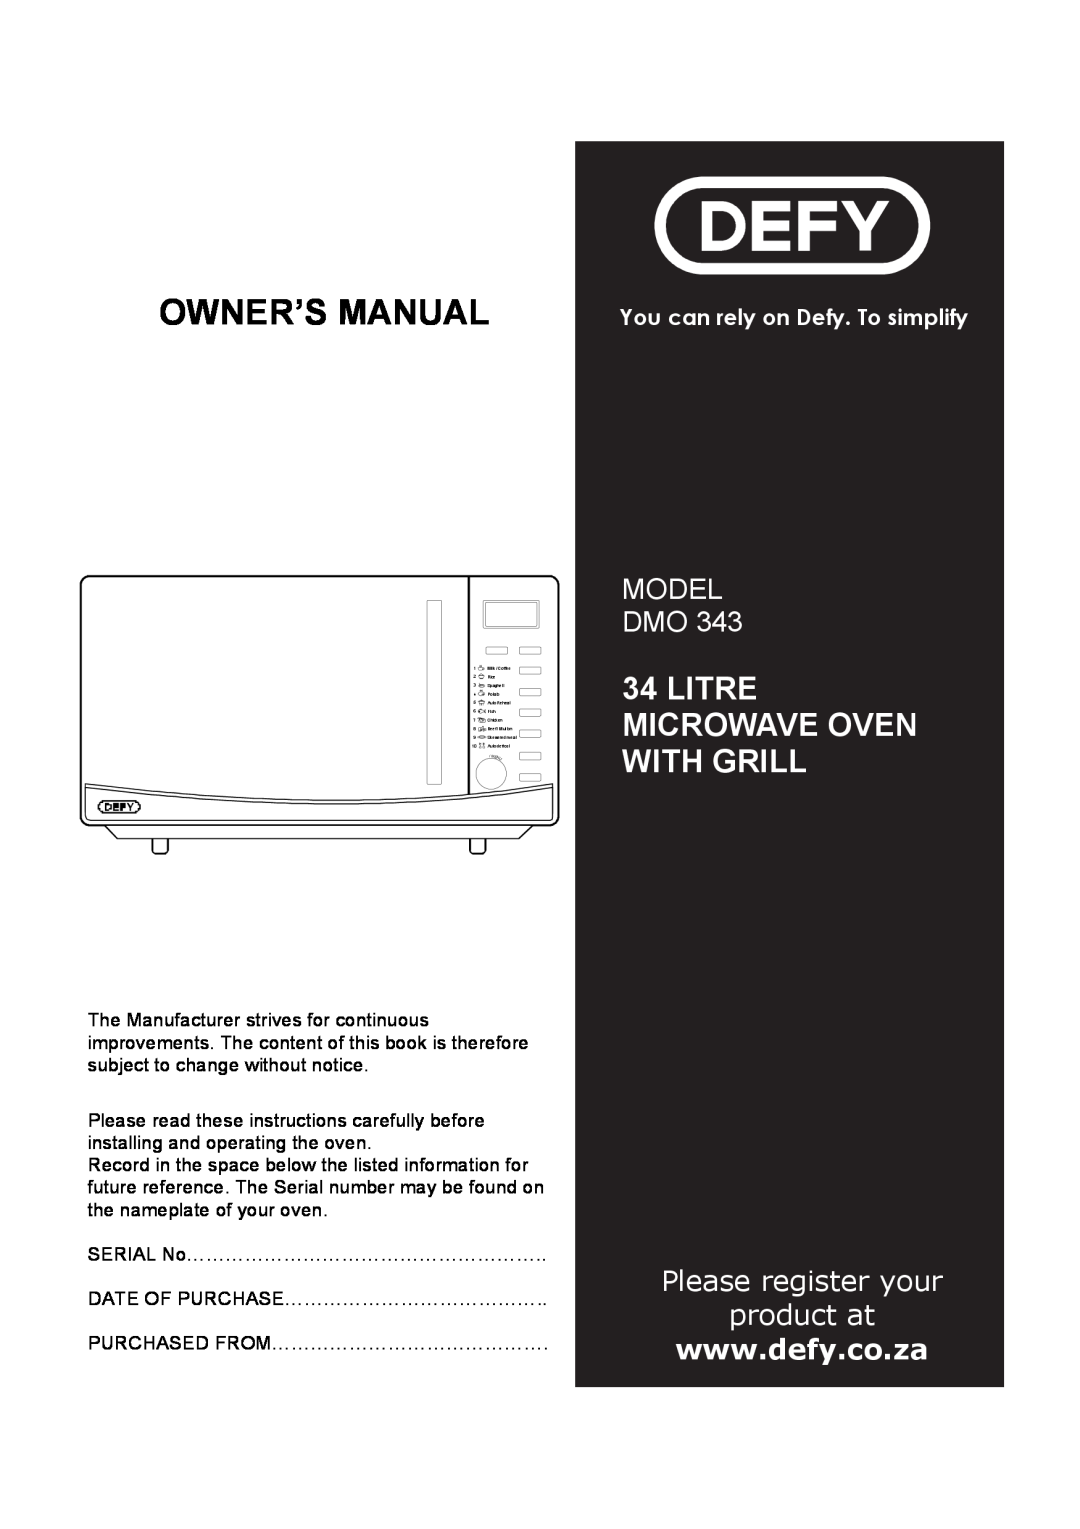 Defy Appliances DMO 343 owner manual 34LITRE MICROWAVE OVEN WITH GRILL, Model Dmo, Please register your product at 